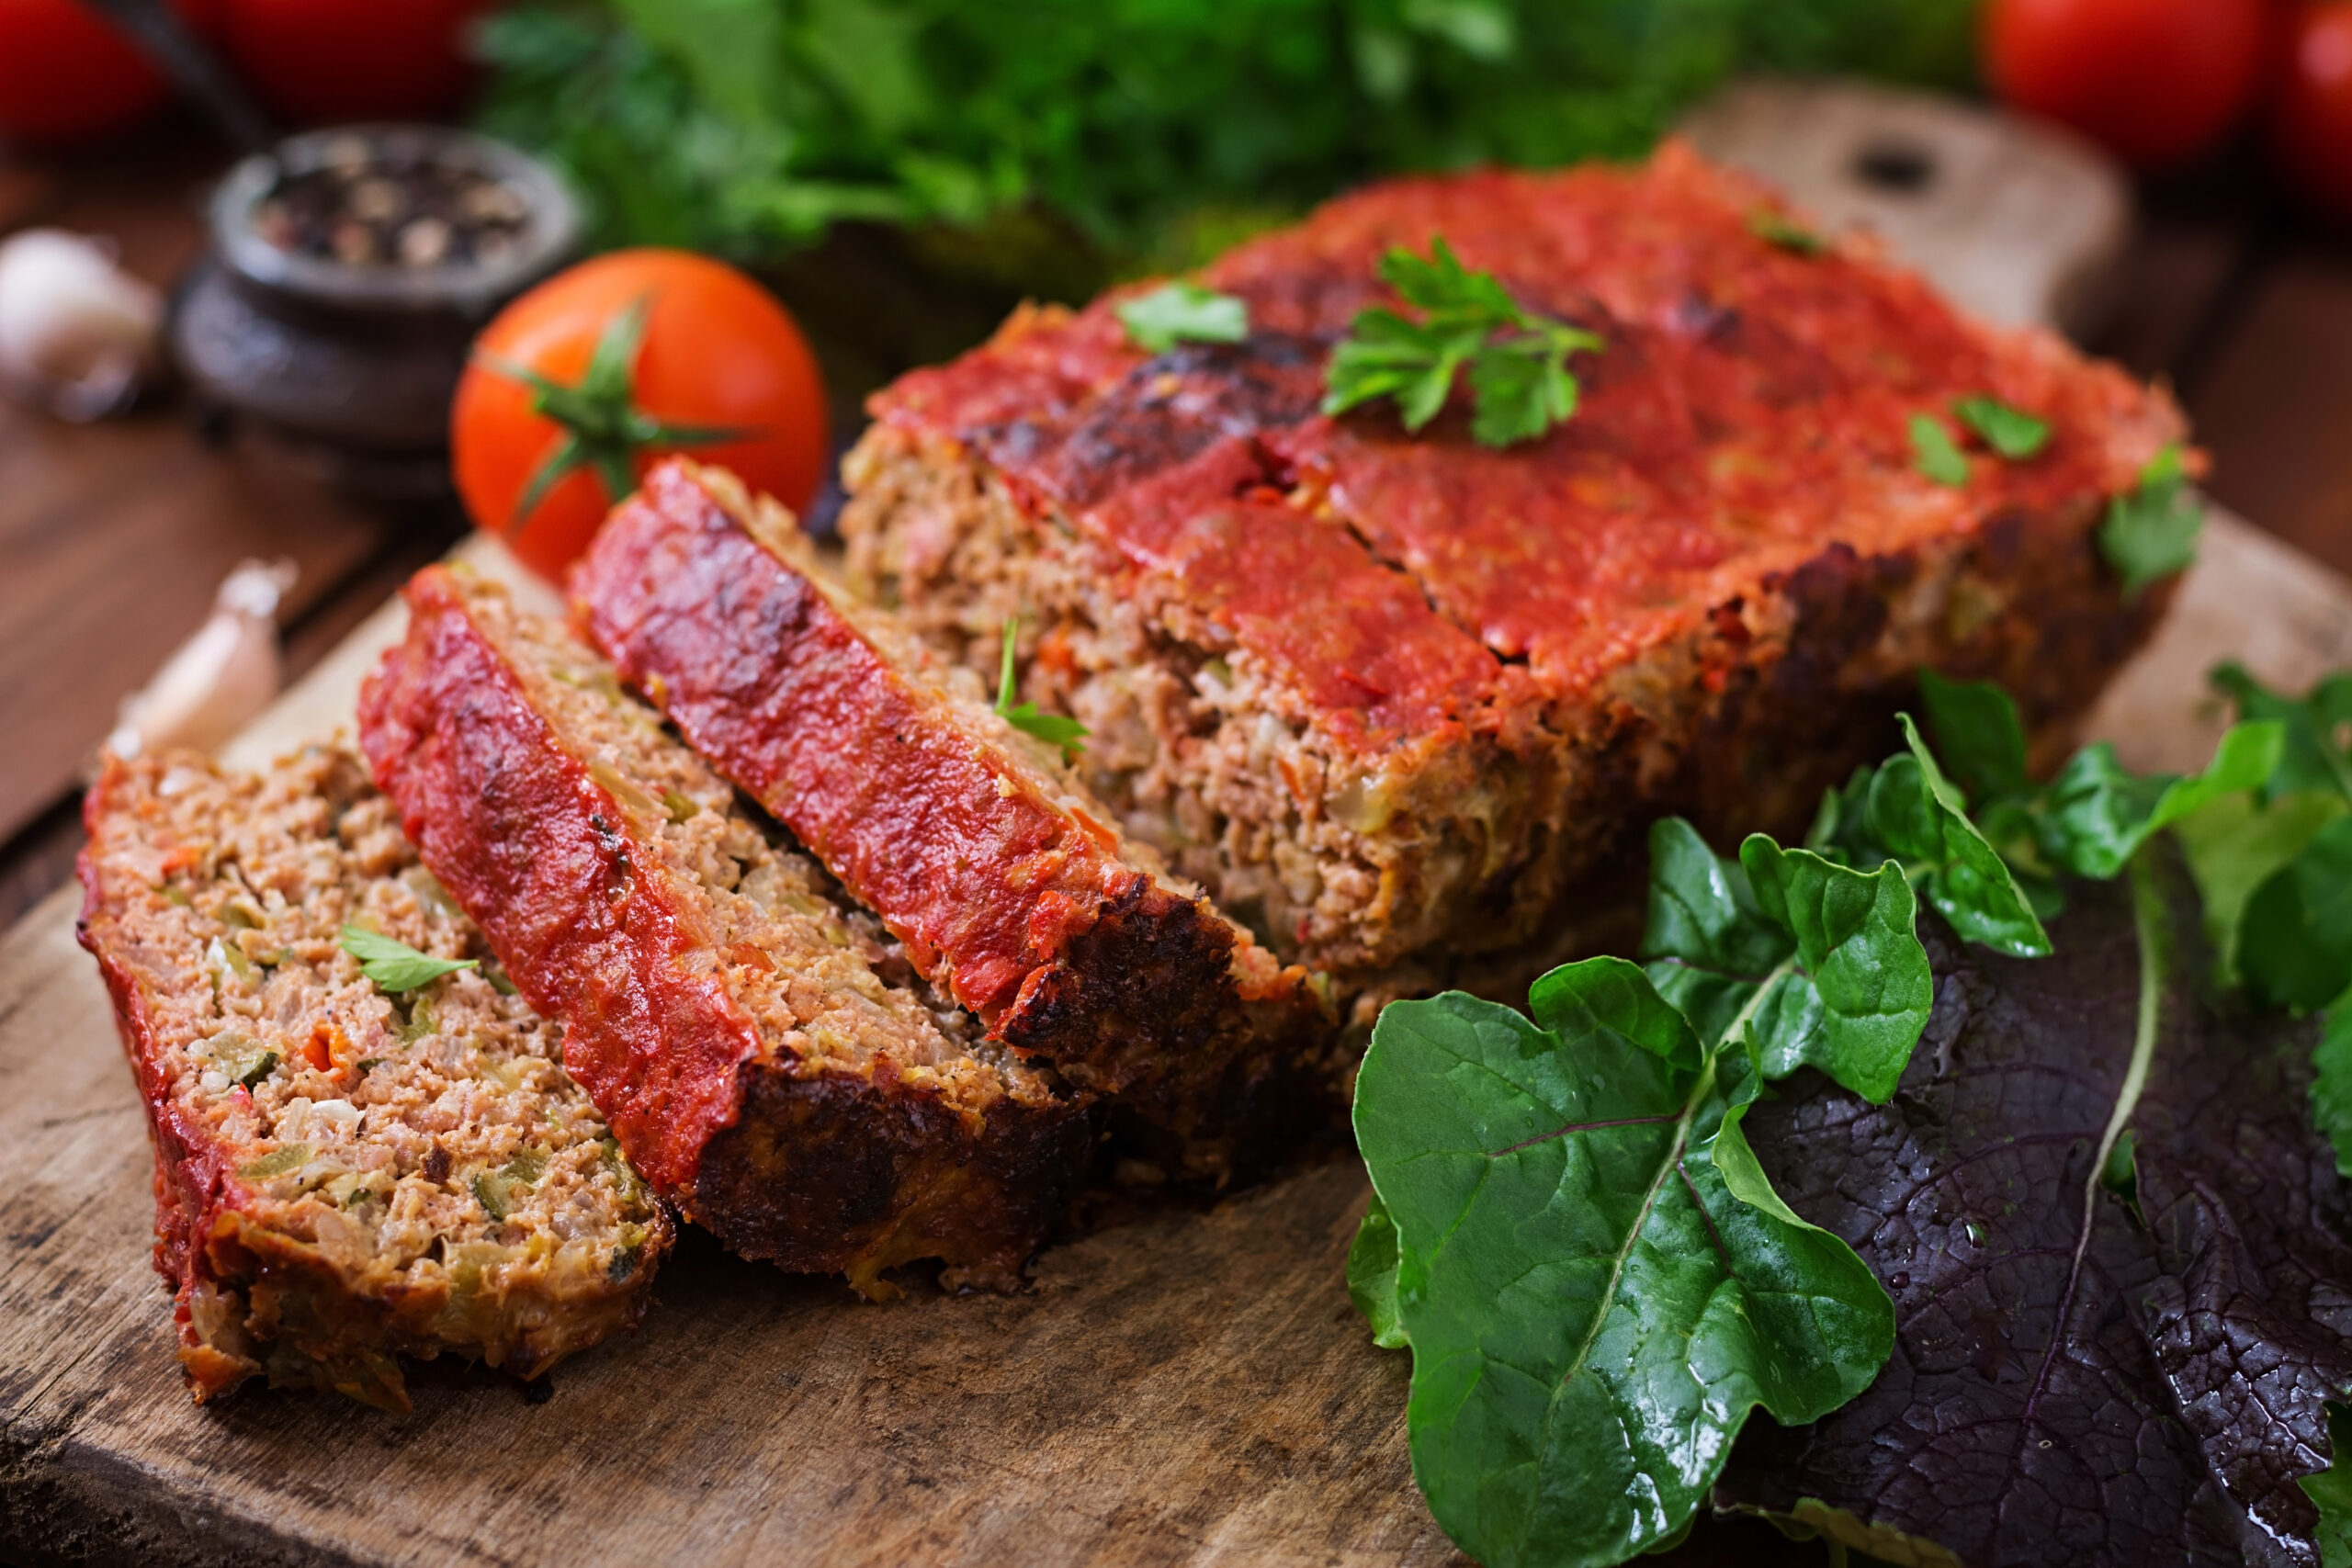 Ready for some Keto Meatloaf?